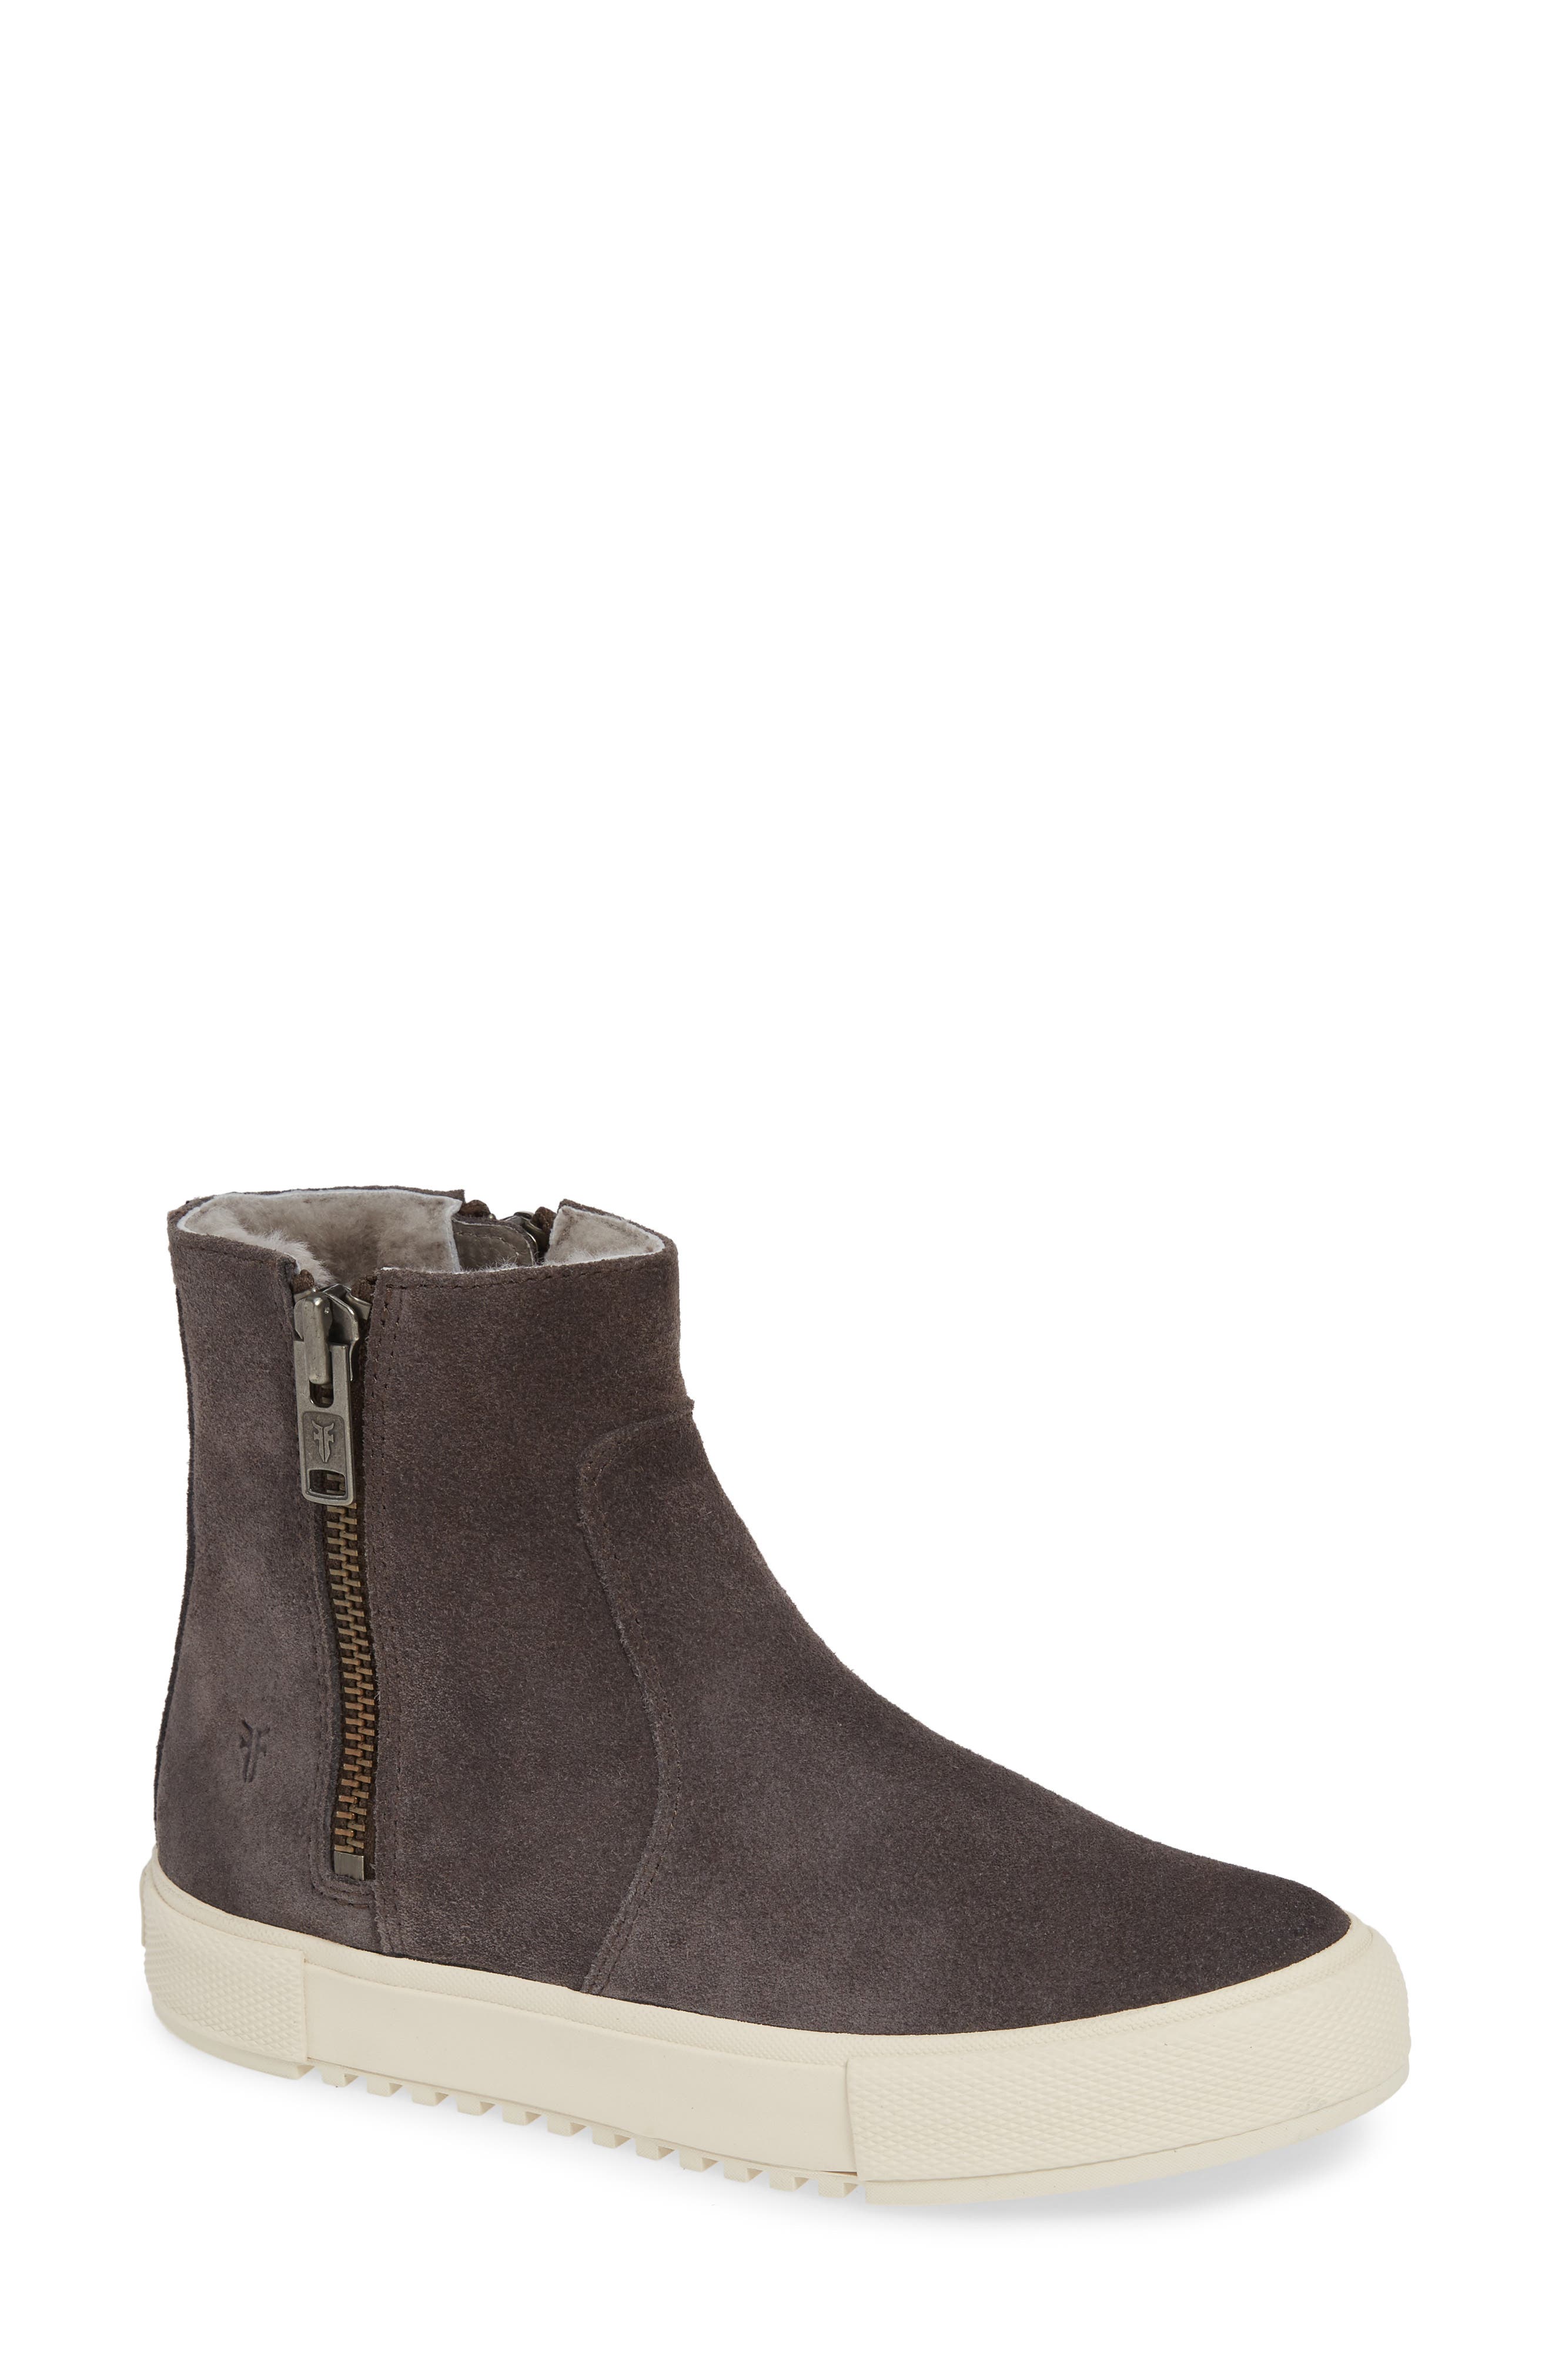 Frye Gia Genuine Shearling Lined Bootie 